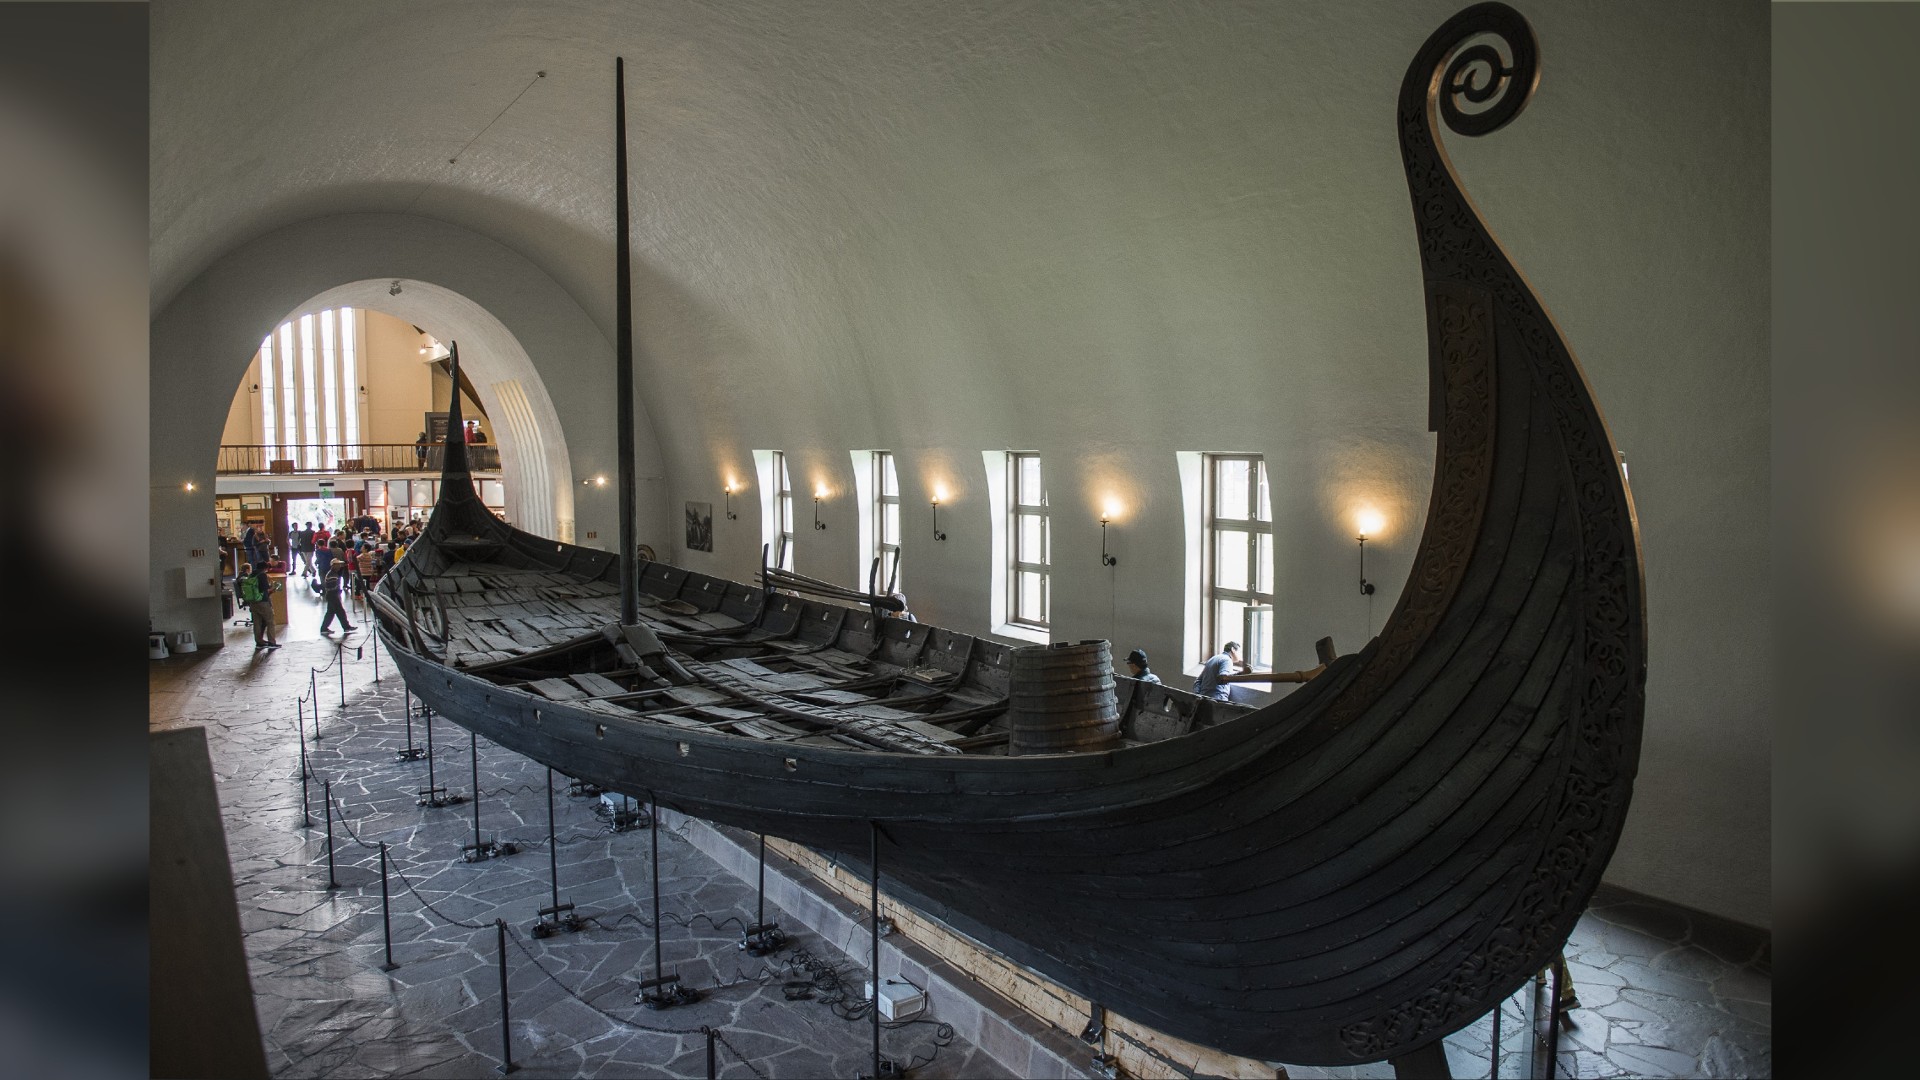 A general view of the Oseberg Ship at the Viking Ship museum, Oslo, Norway on September 10, 2017. The most famous museum is the Oseberg Ship in its entirety, excavated from the largest known ship burial in the world.  The Oseberg ship was built in southwest Norway around the year 820 and is made of oak.  In 834, the ship was used as a burial ship for two powerful women.